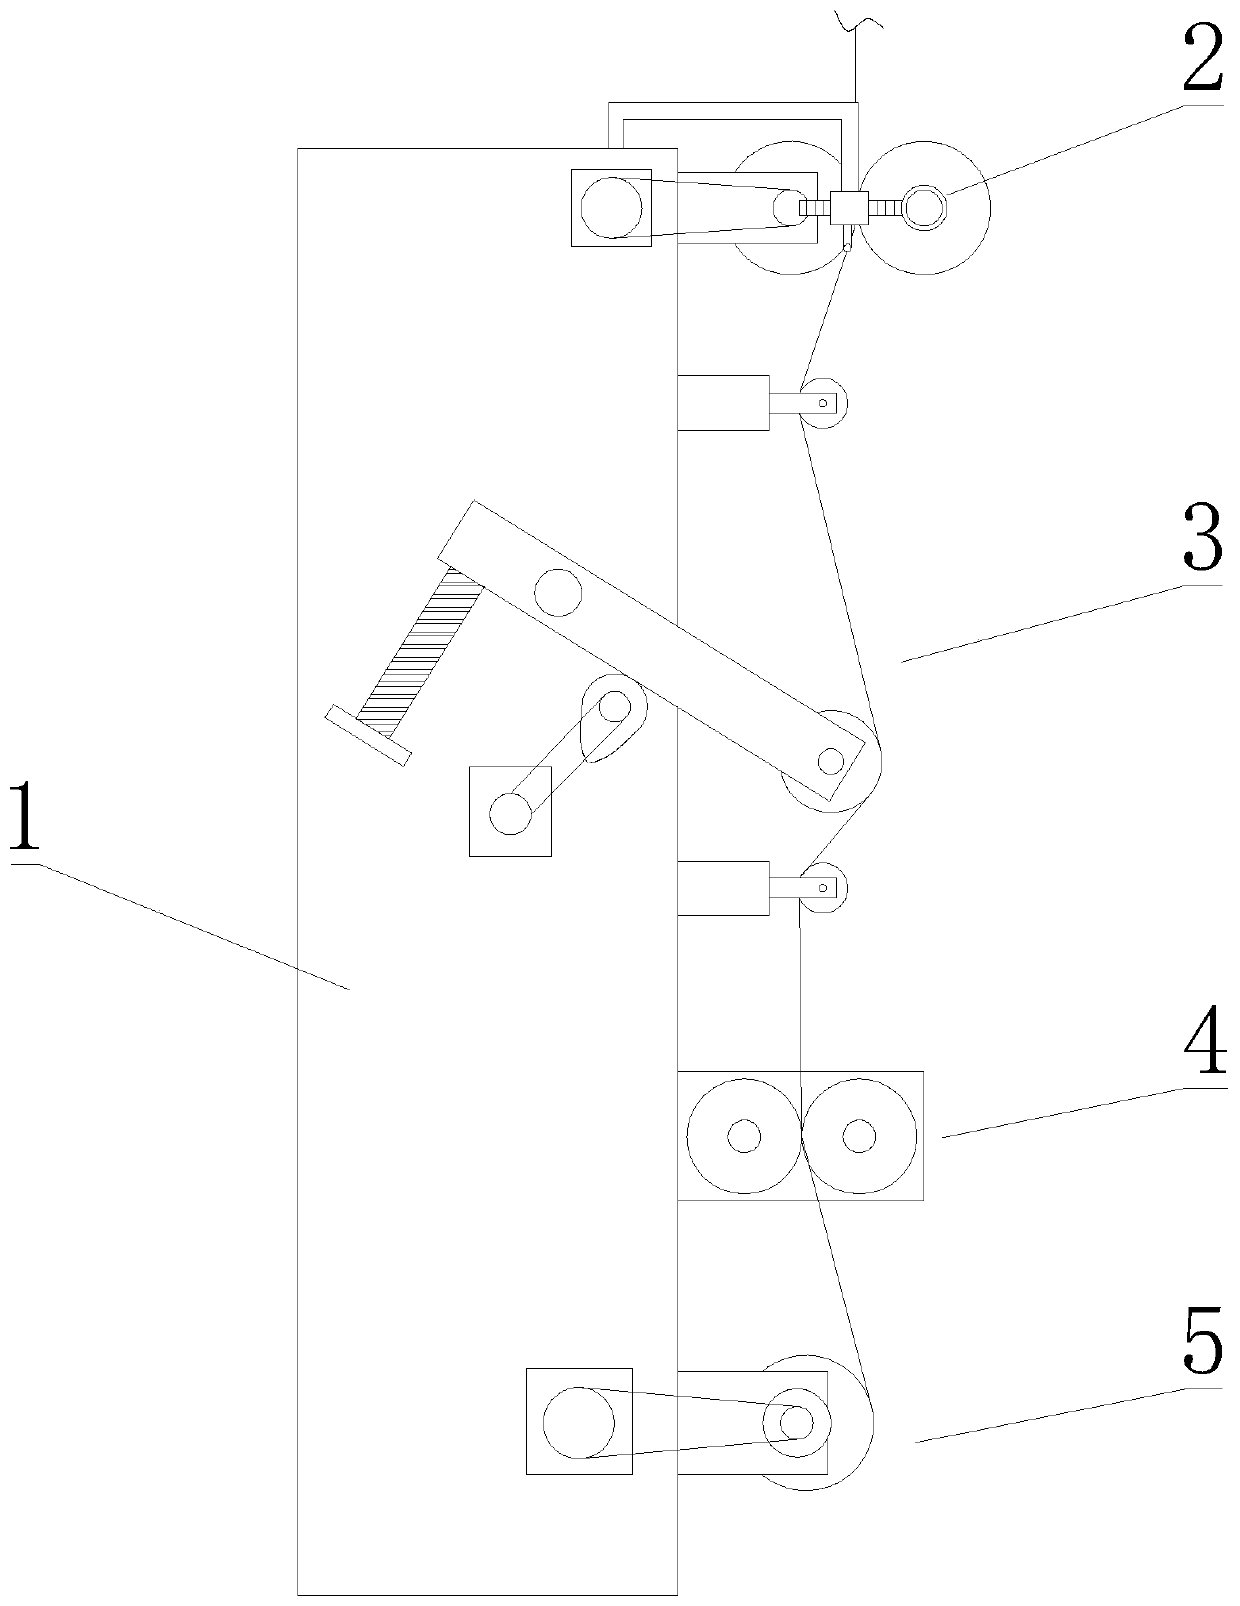 Tensioning and winding mechanism for blended yarns